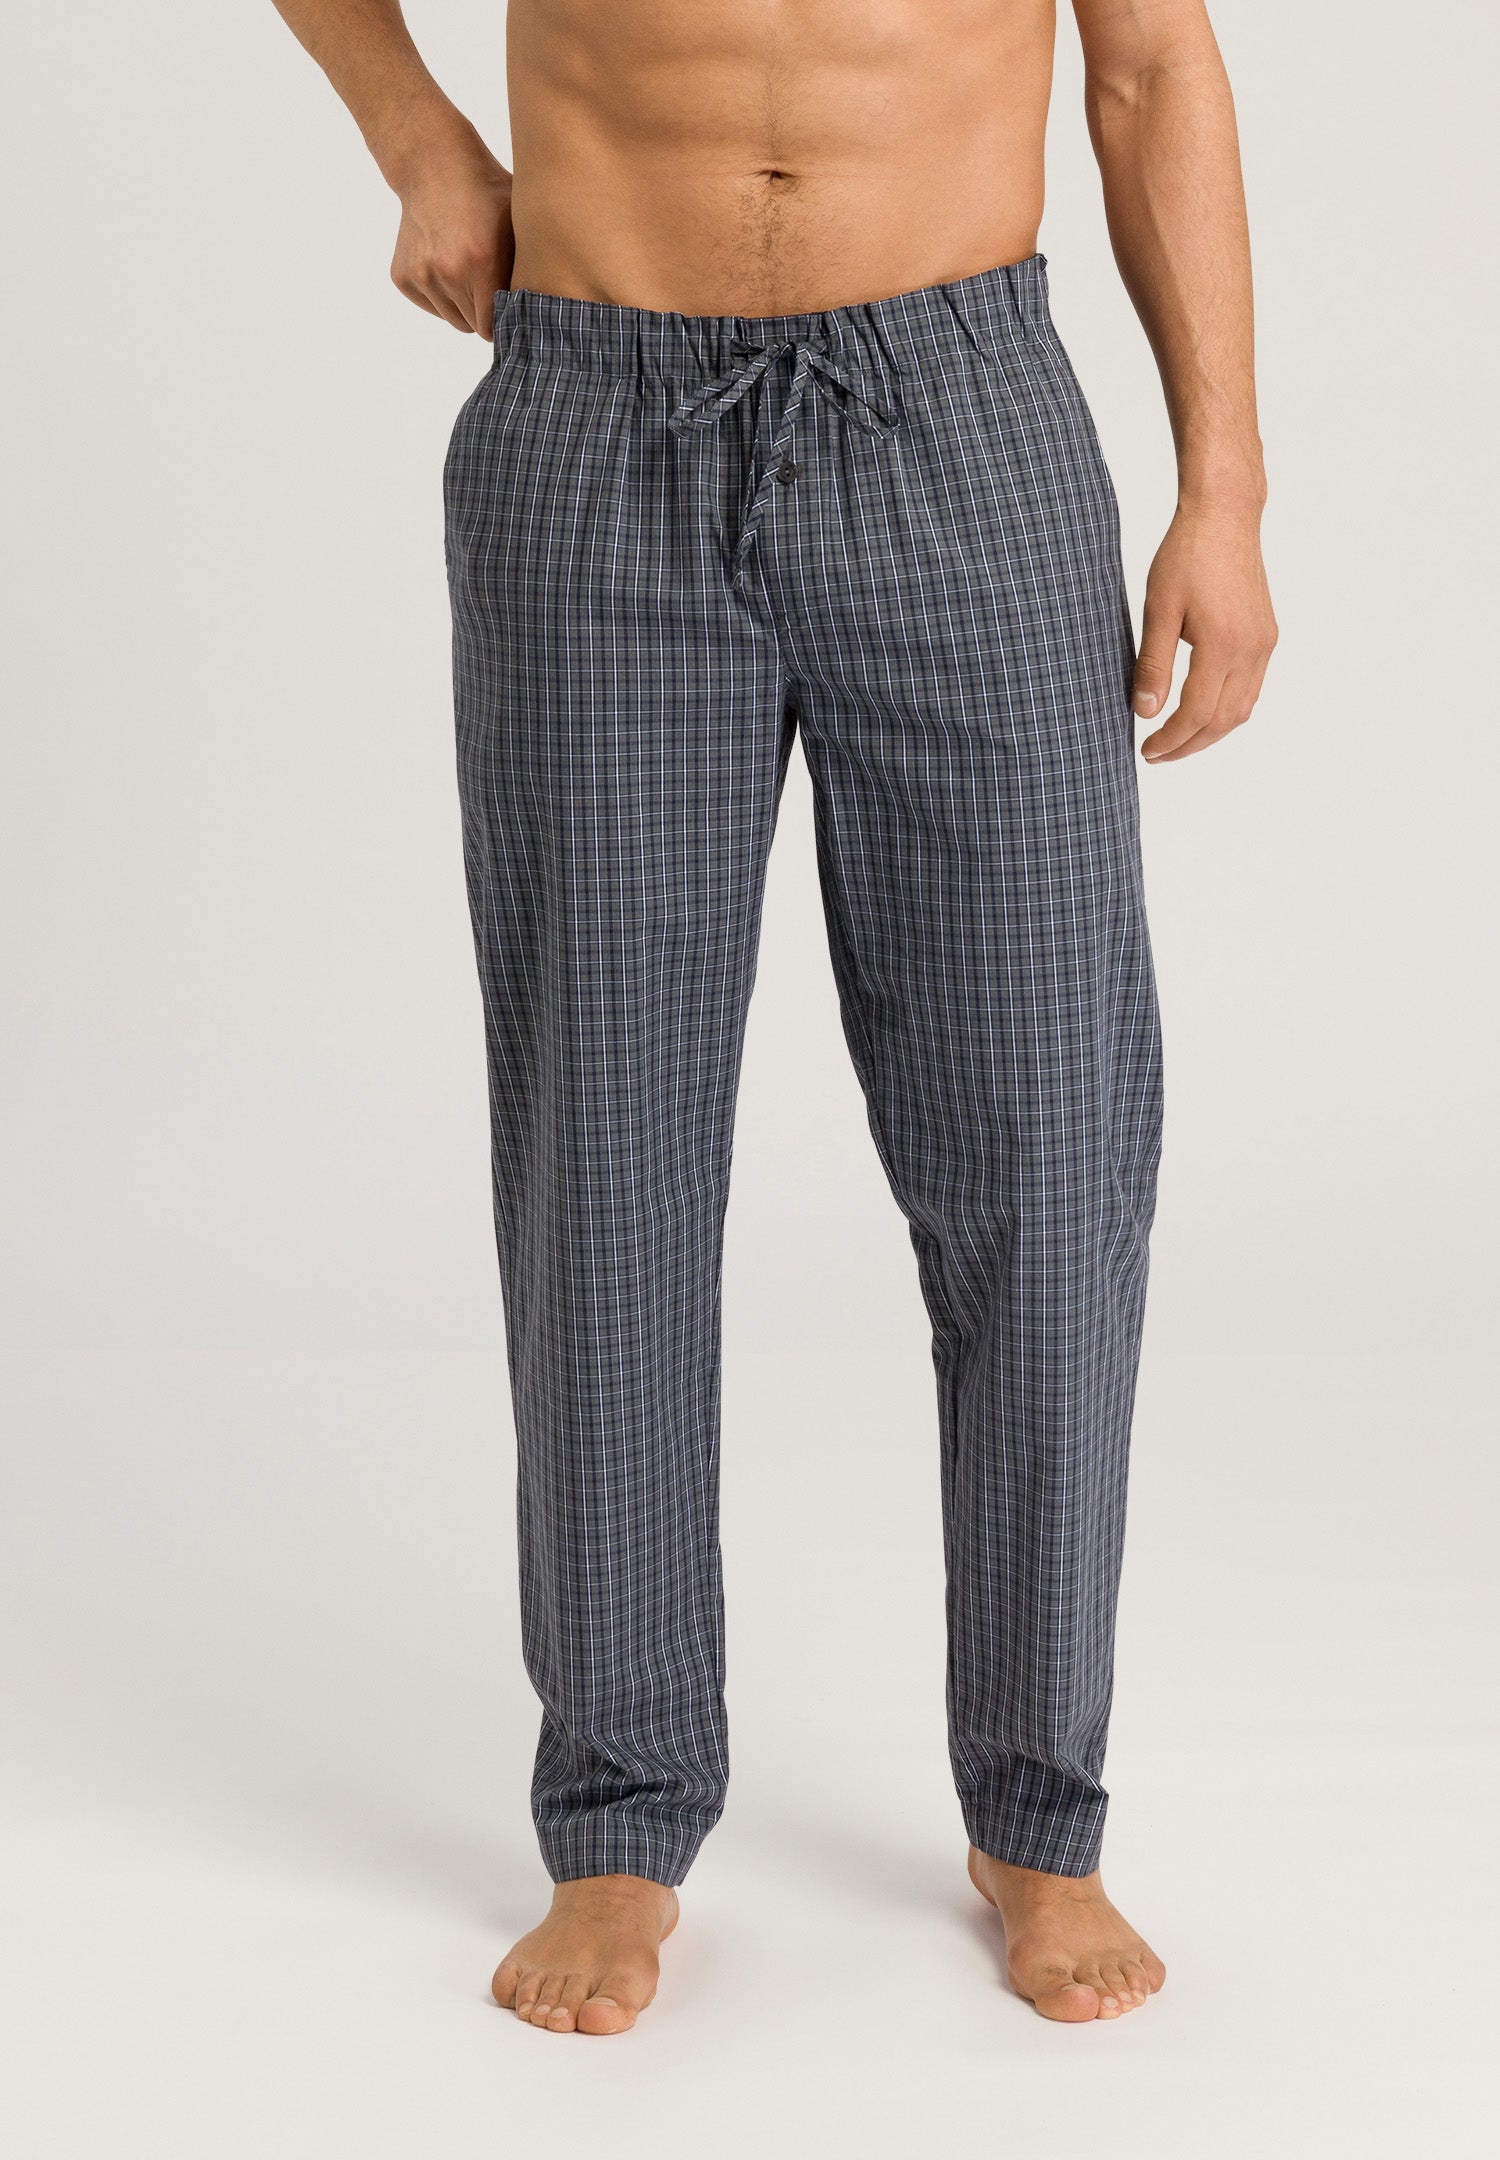 75436 Night & Day Woven Lounge Pant - 2385 Casual Check